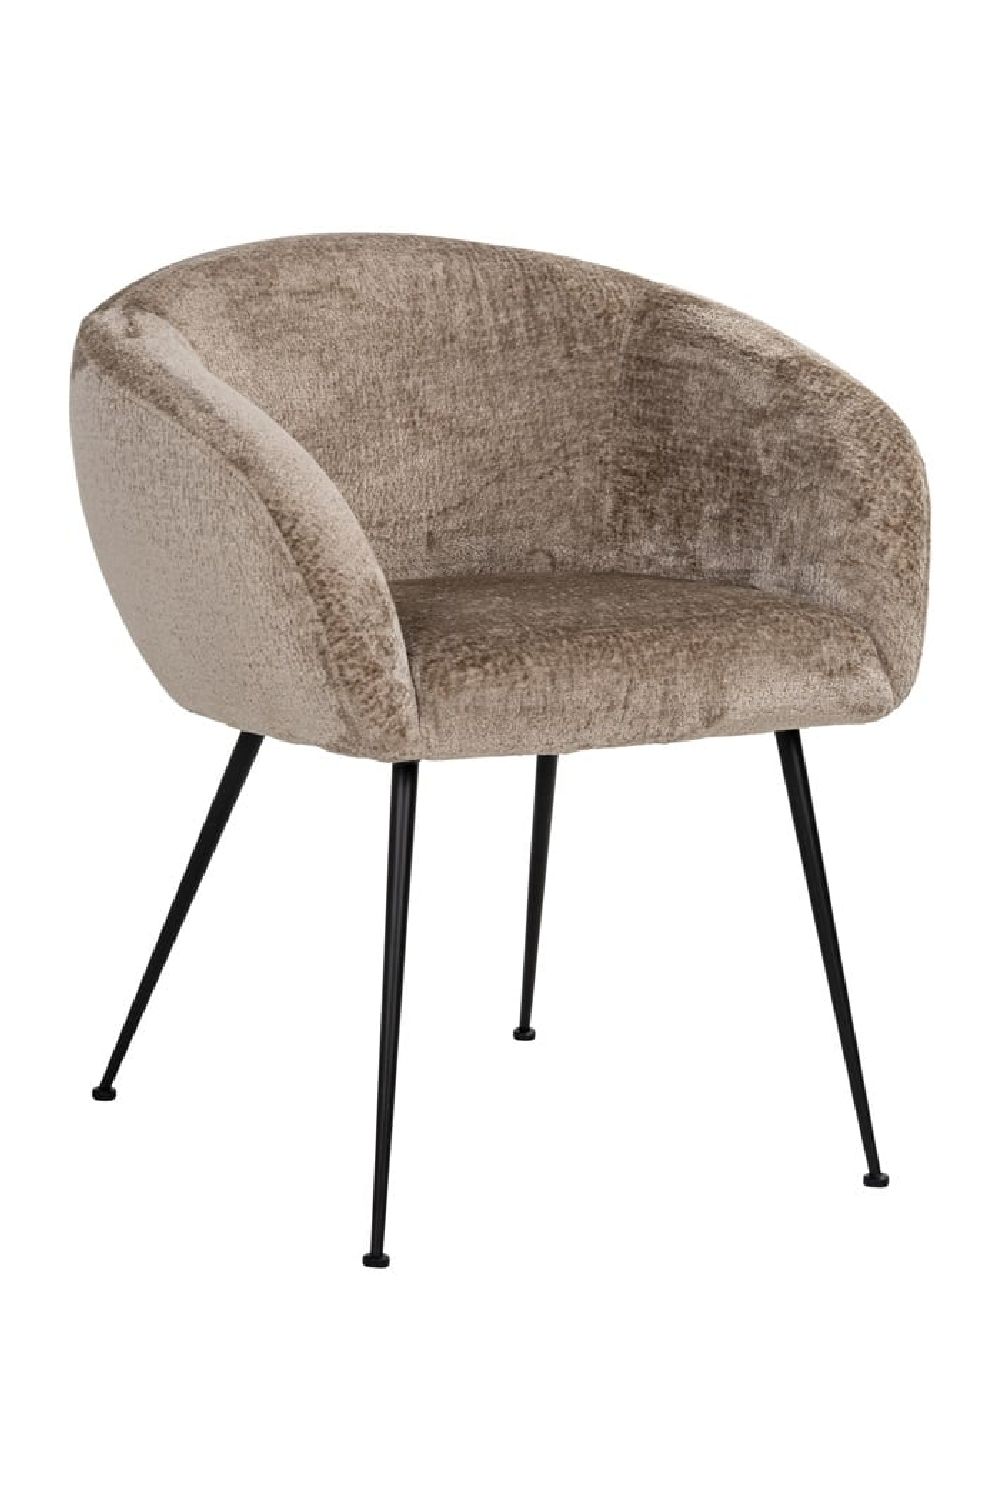 Curved Modern Dining Chair | OROA Ruby | Oroa.com